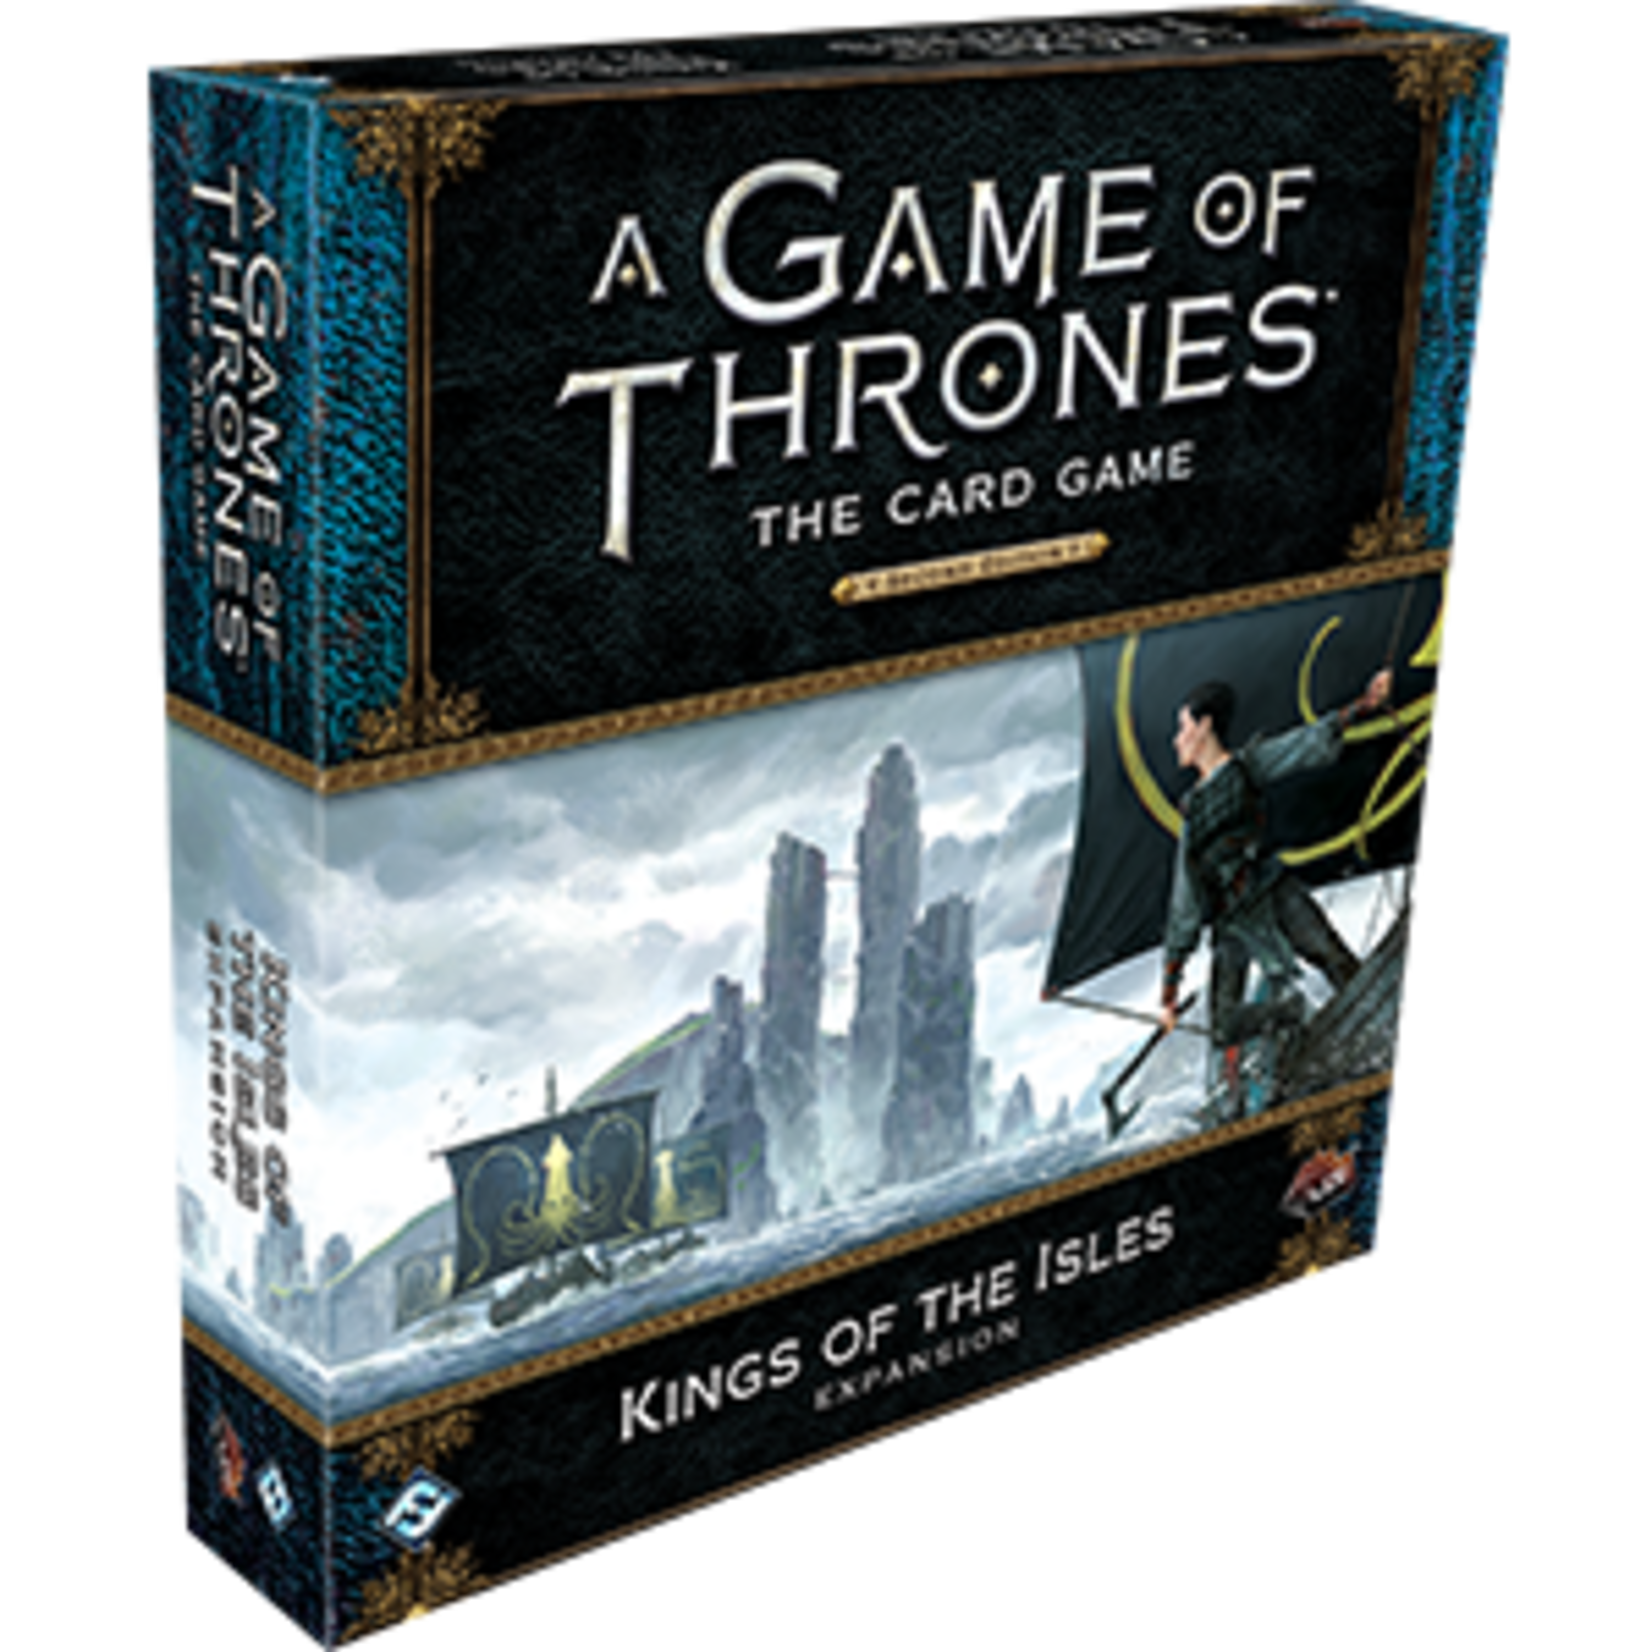 Game of Thrones LCG King of the Isles Expansion